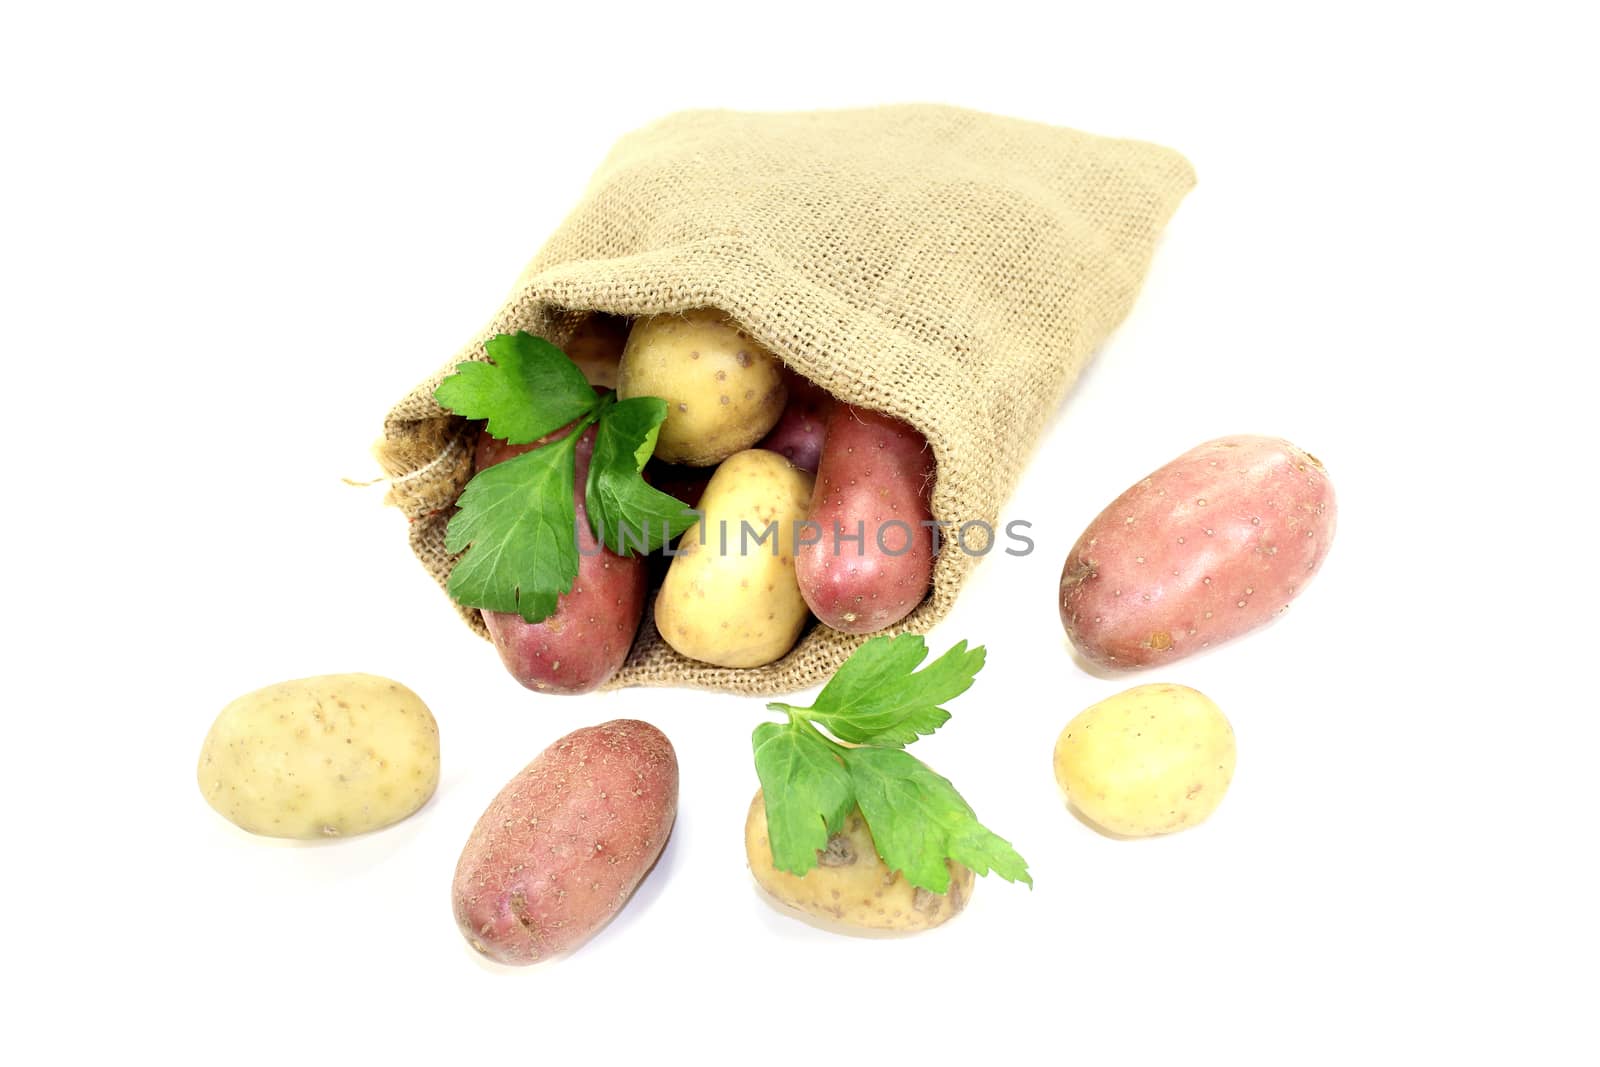 colorful potatoes in jute sack on bright background